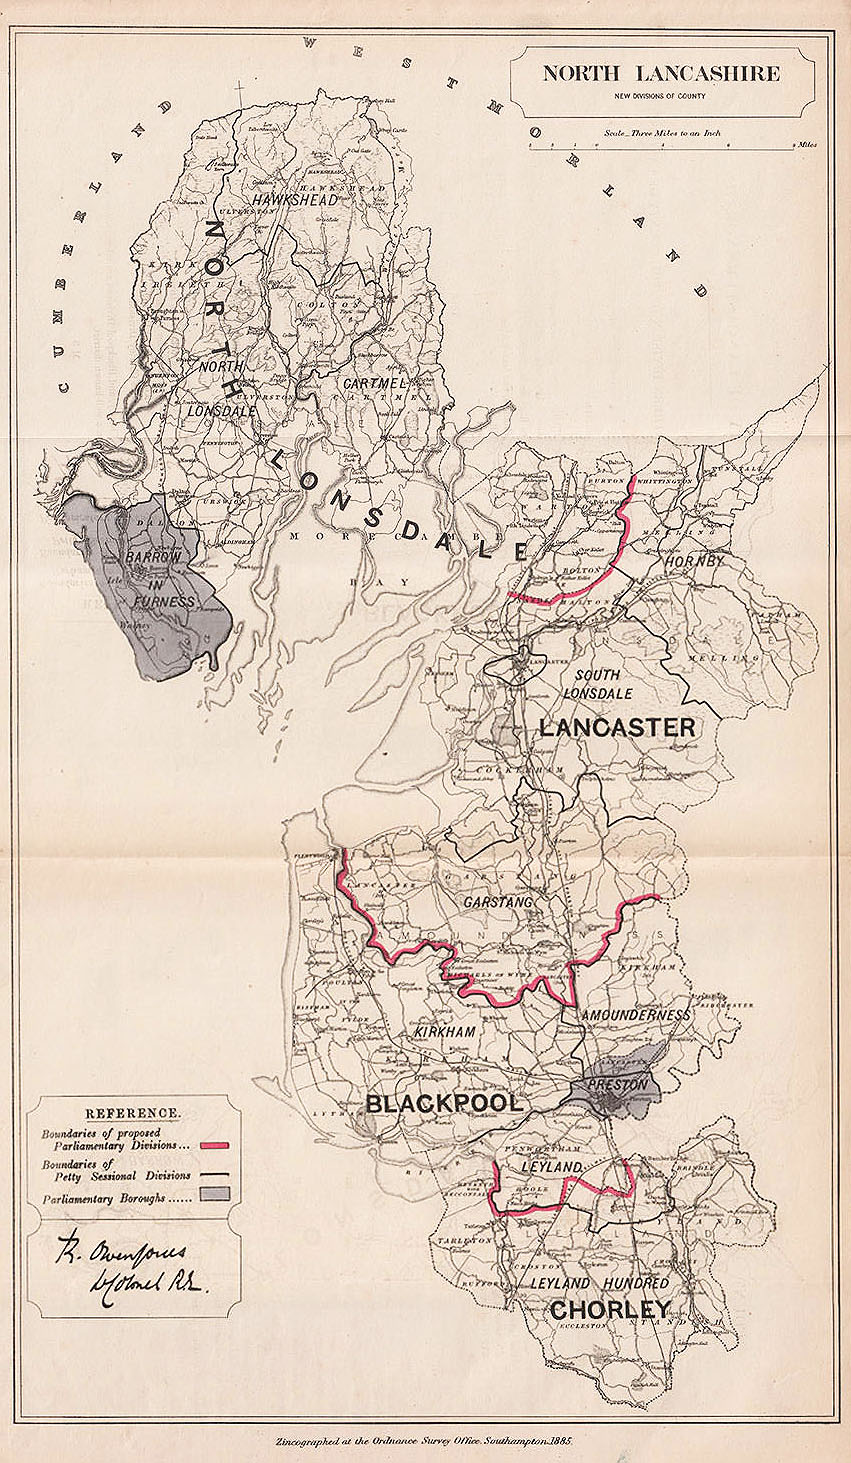 North Lancashire New Divisions of the County